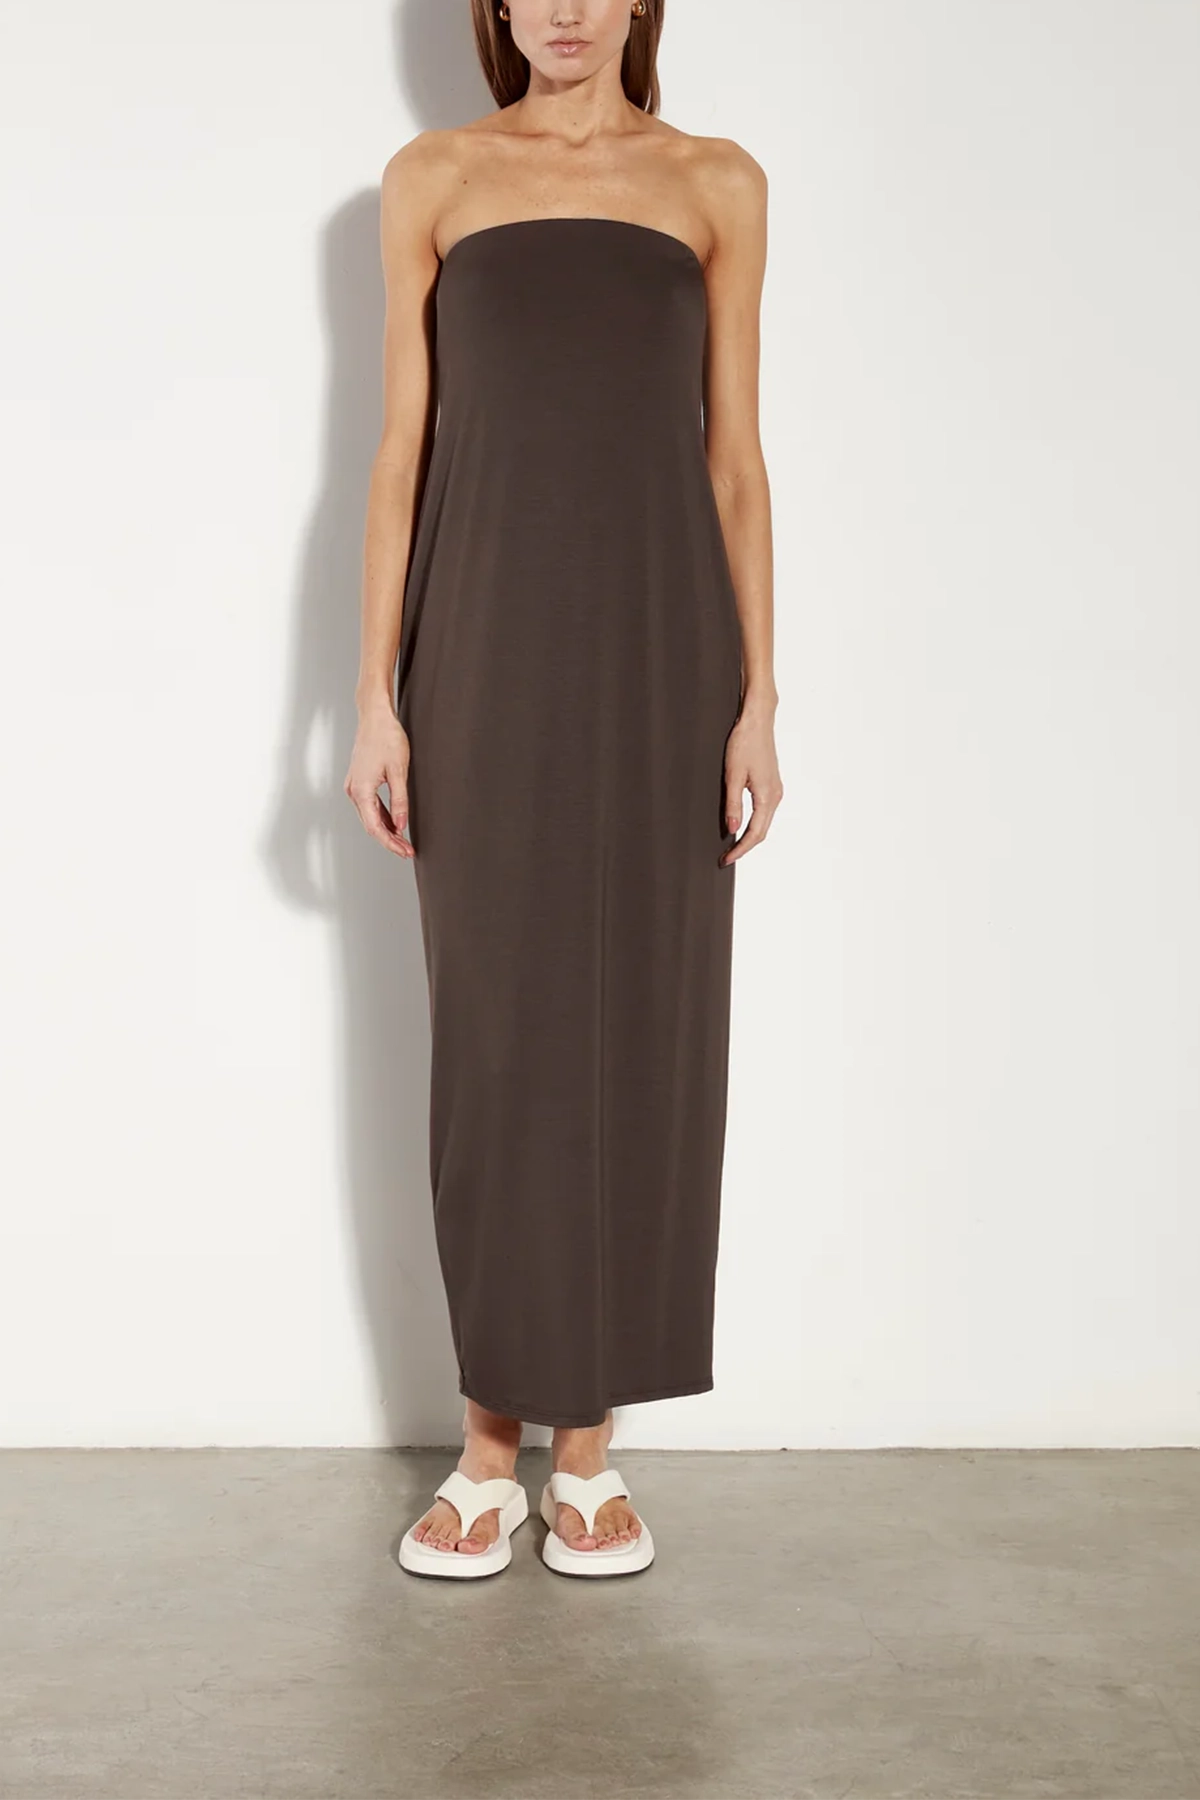 Enza Costa Luxe Knit Strapless Maxi Dress